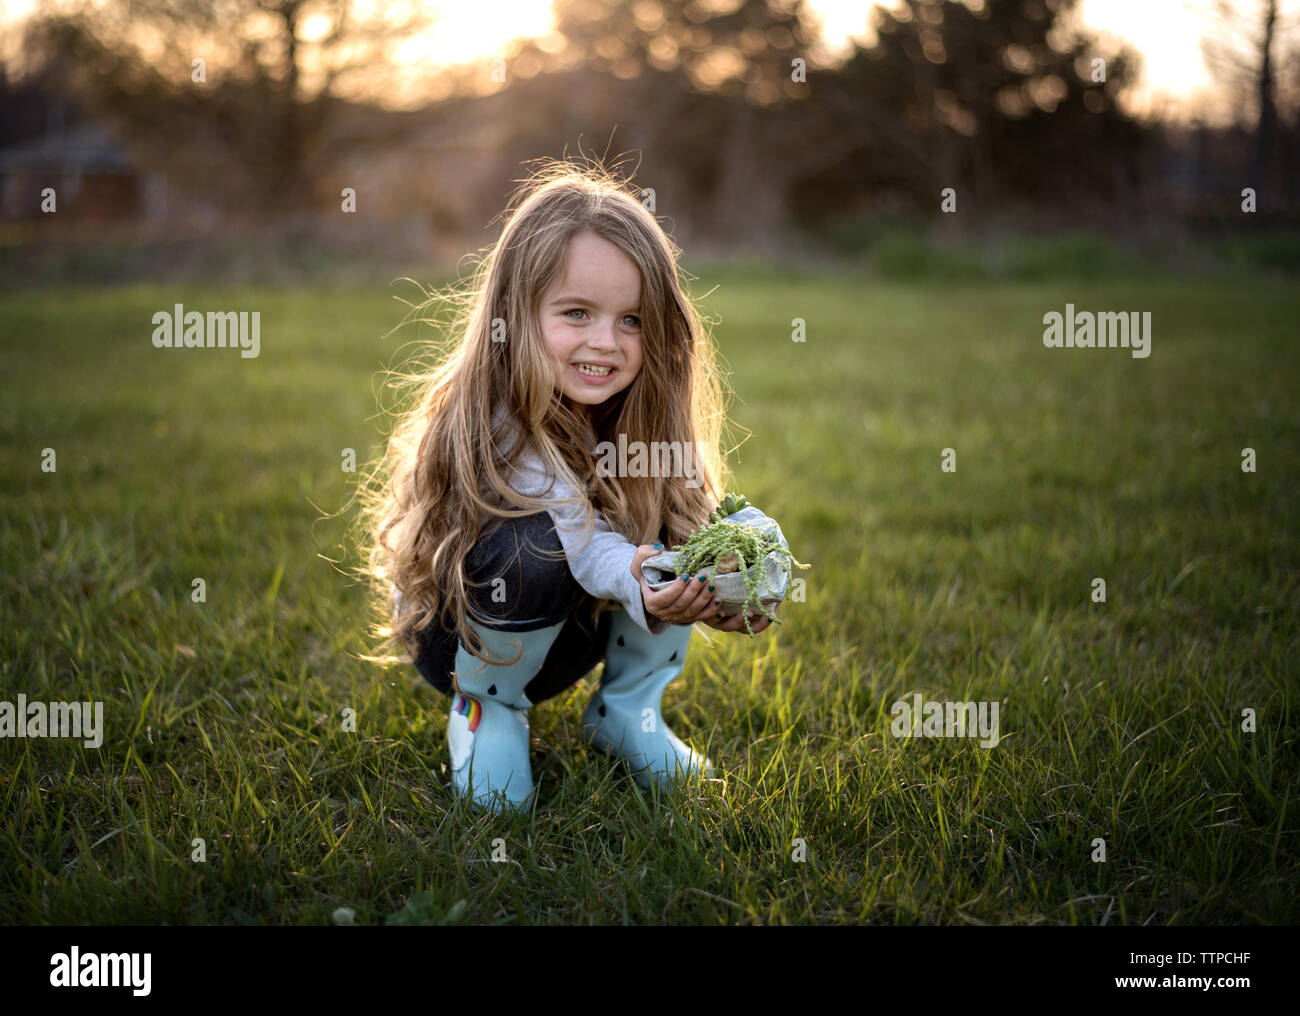 Happy young girl wearing rain boots et holding green plant Banque D'Images